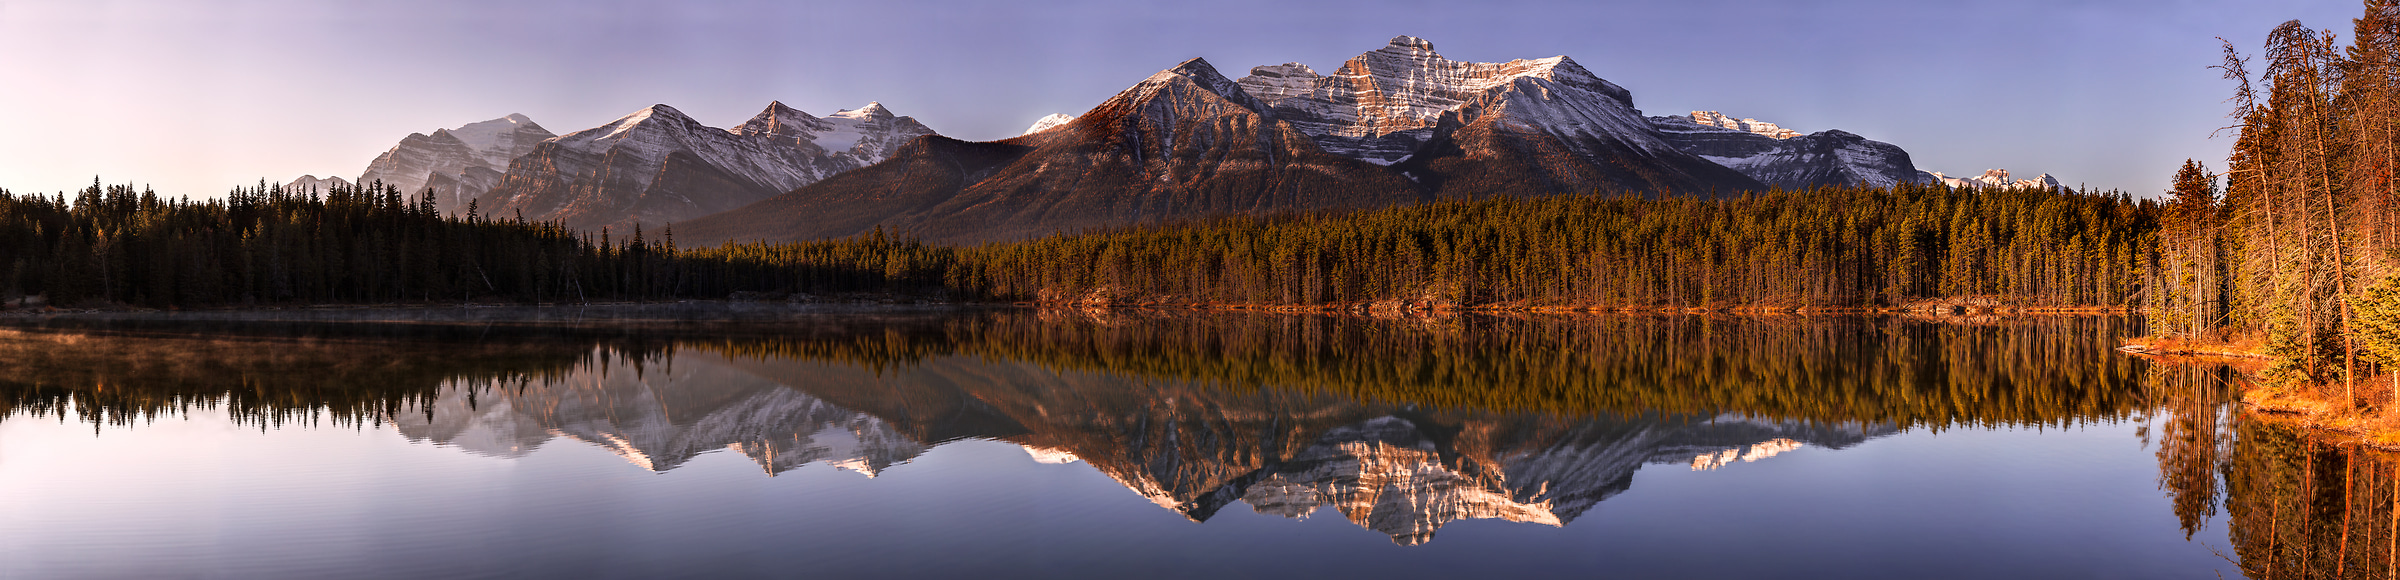 273 megapixels! A very high resolution, large-format VAST photo print of a panorama landscape; photograph created by Chris Collacott in Herbert Lake, Alberta, Canada